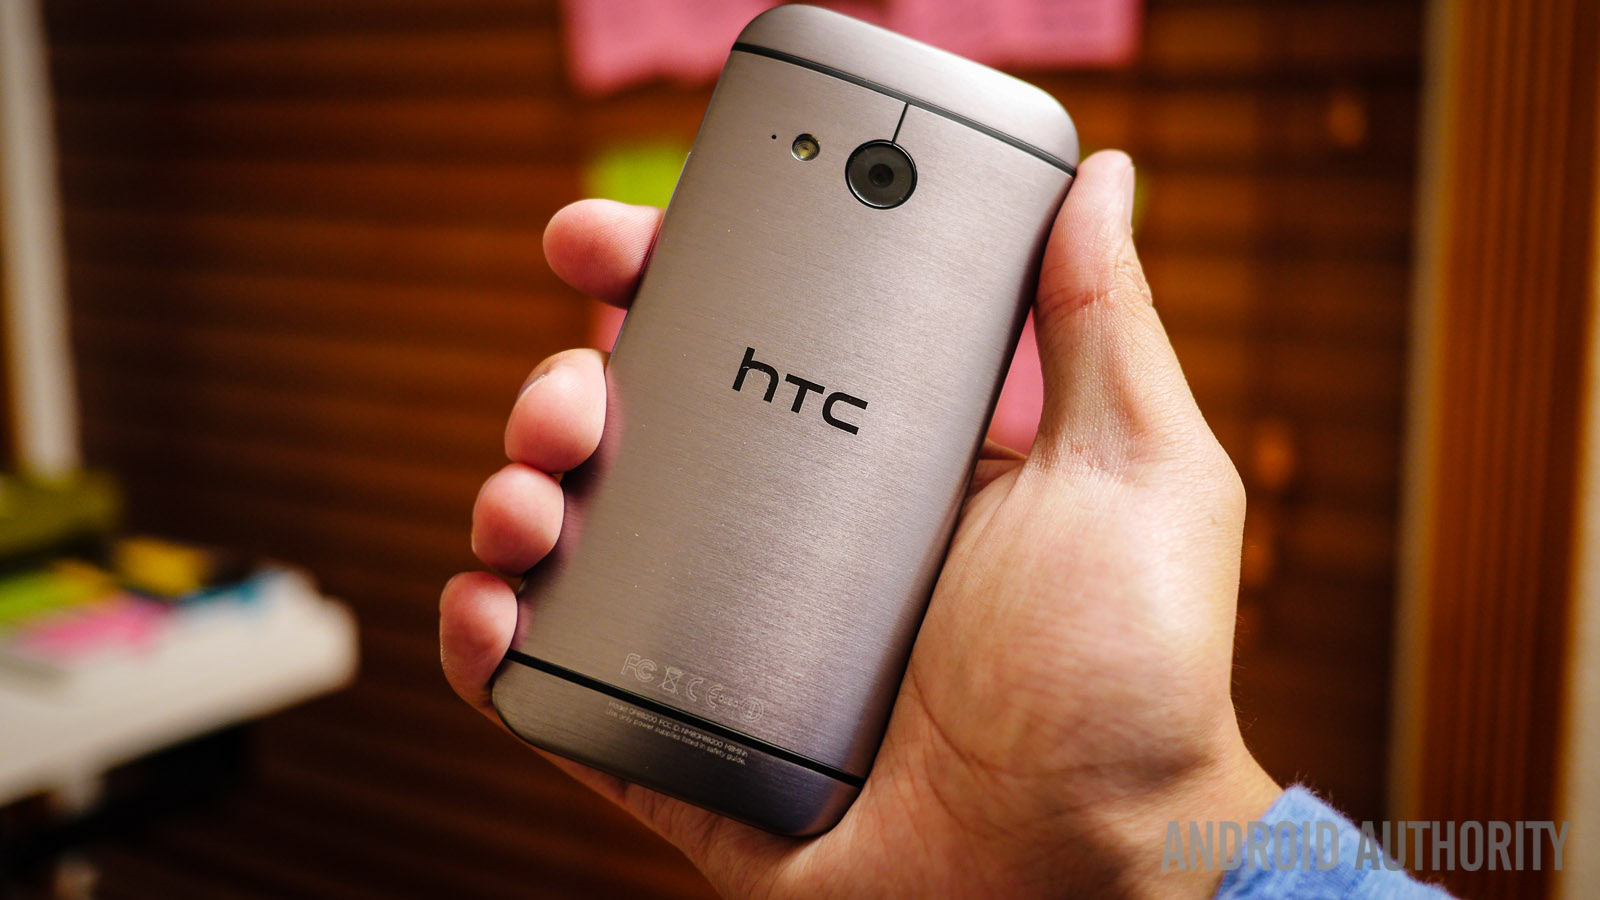 htc one mini 2 first look (10 of 22)